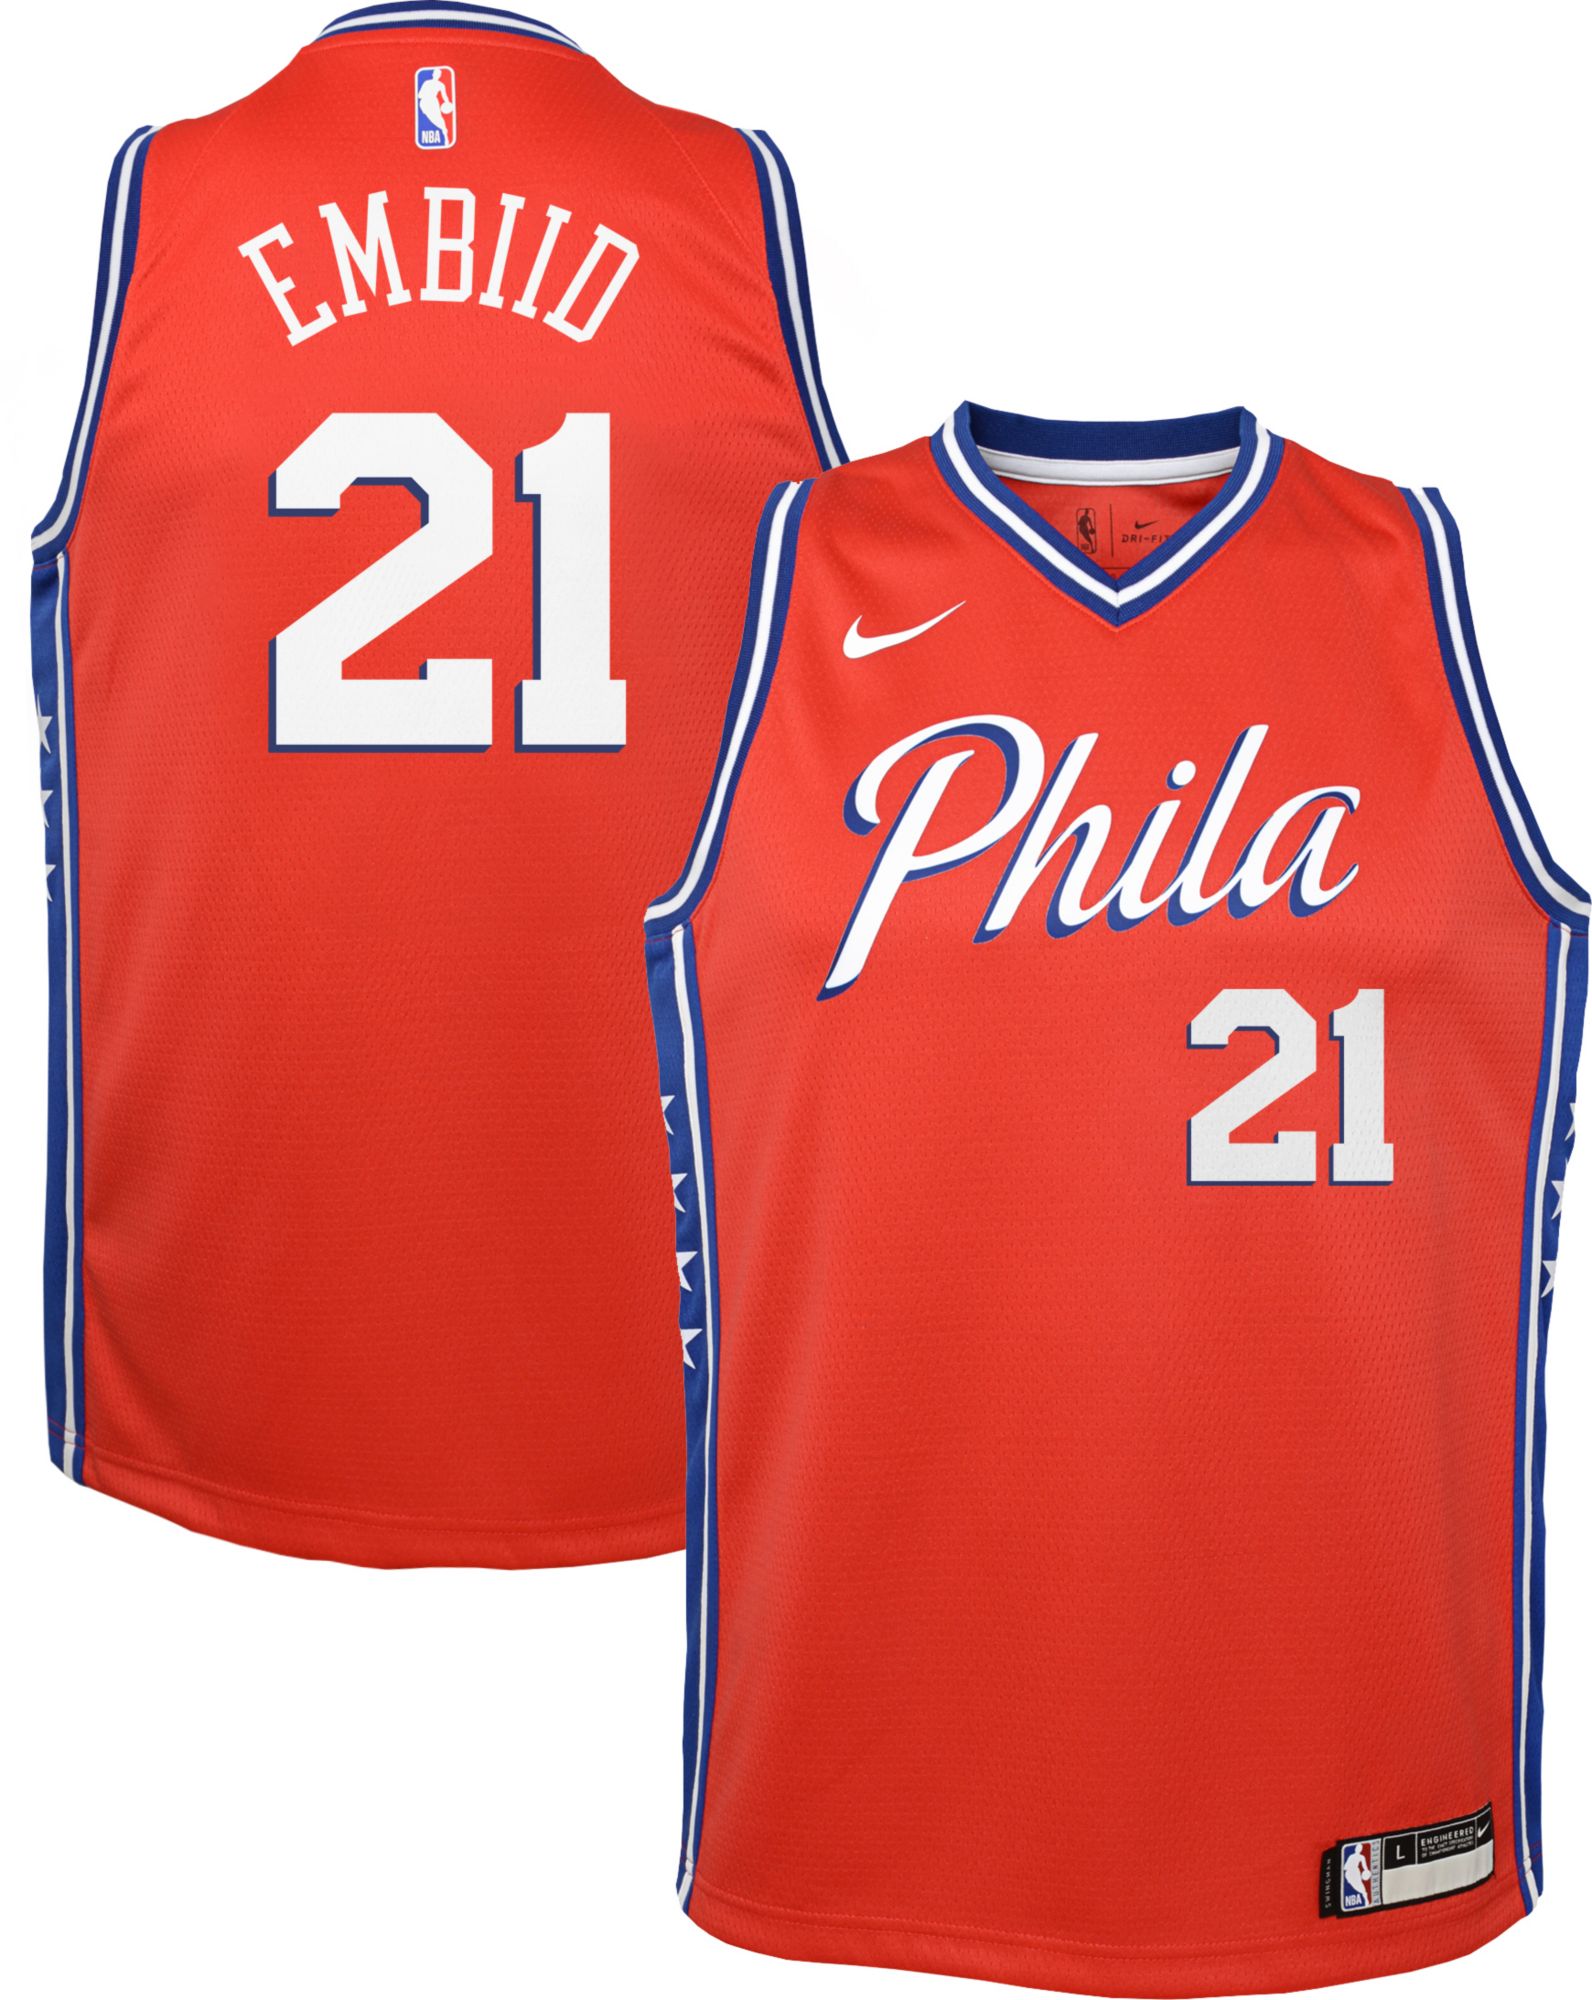 embiid red jersey